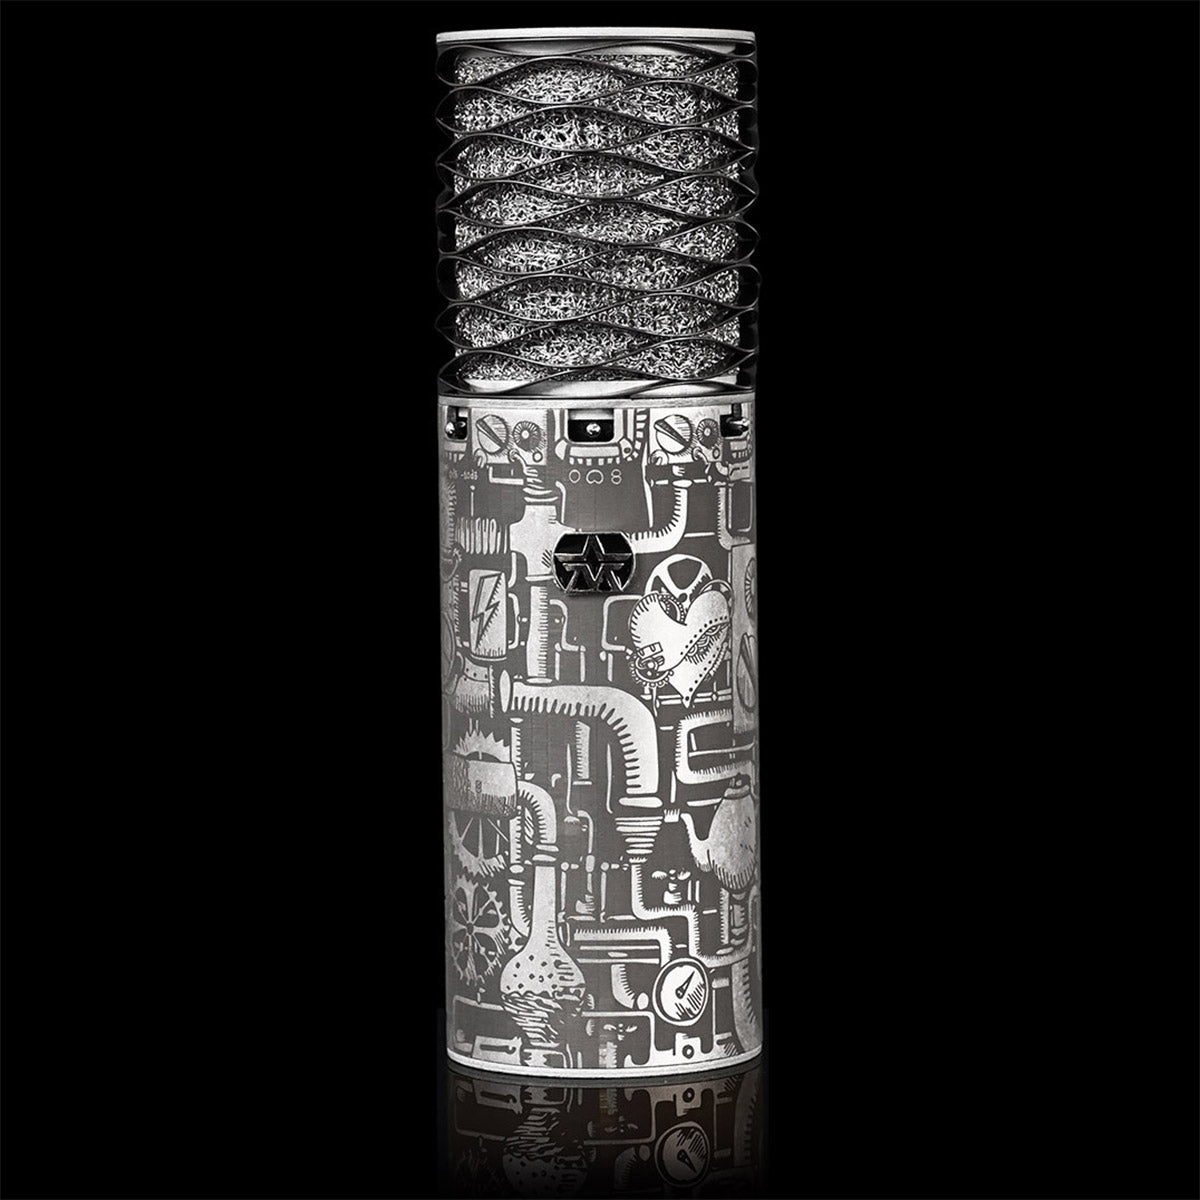 Aston Microphones Spirit 5th Anniversary Engraved Limited Edition